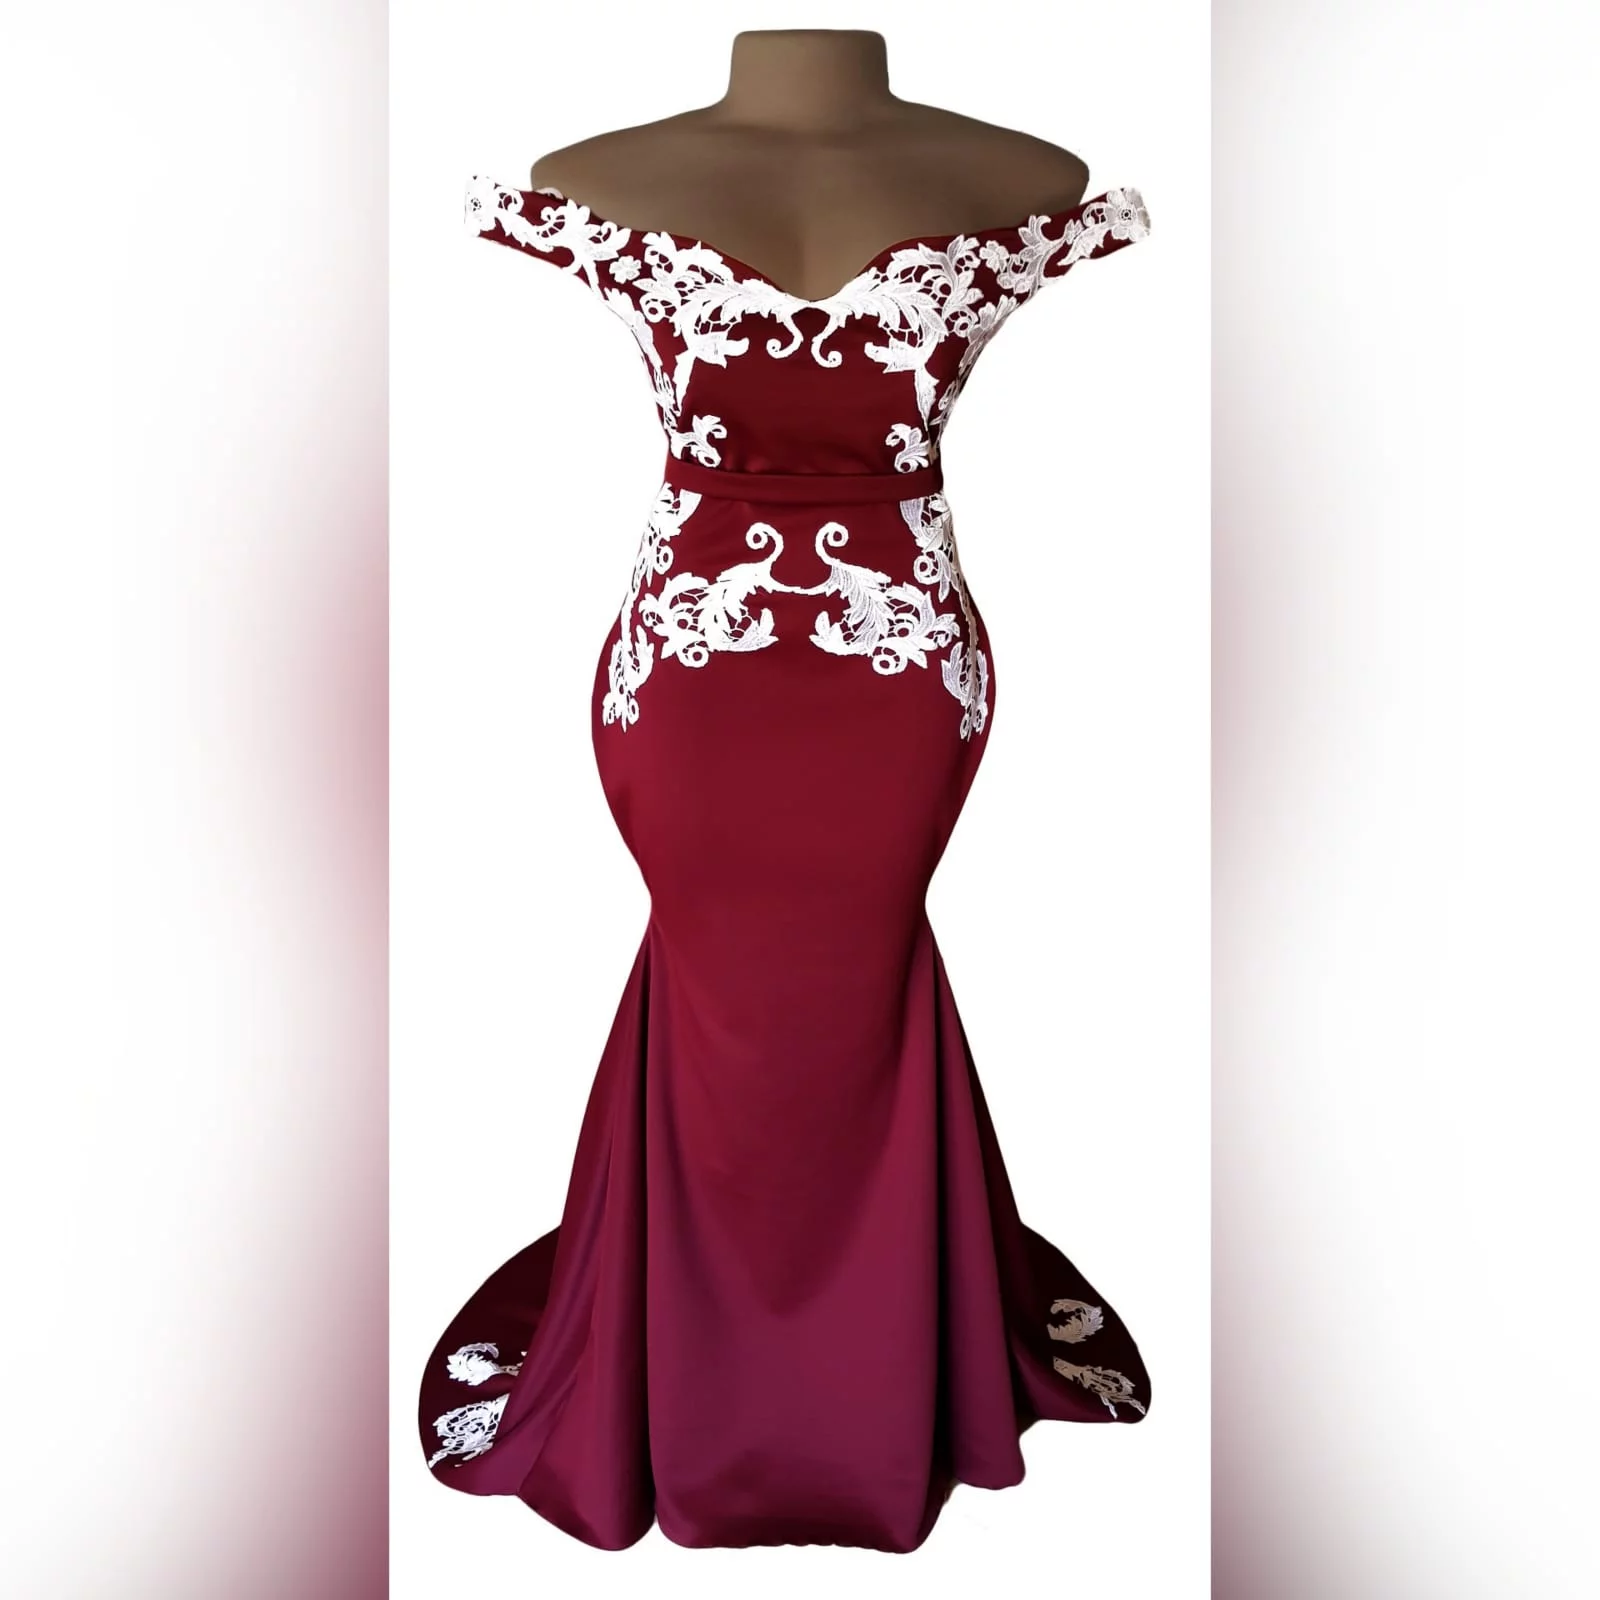 Maroon and white off shoulder soft mermaid matric dress 7 maroon and white off shoulder soft mermaid matric dress. With bodice, hips and train detailed with white lace.